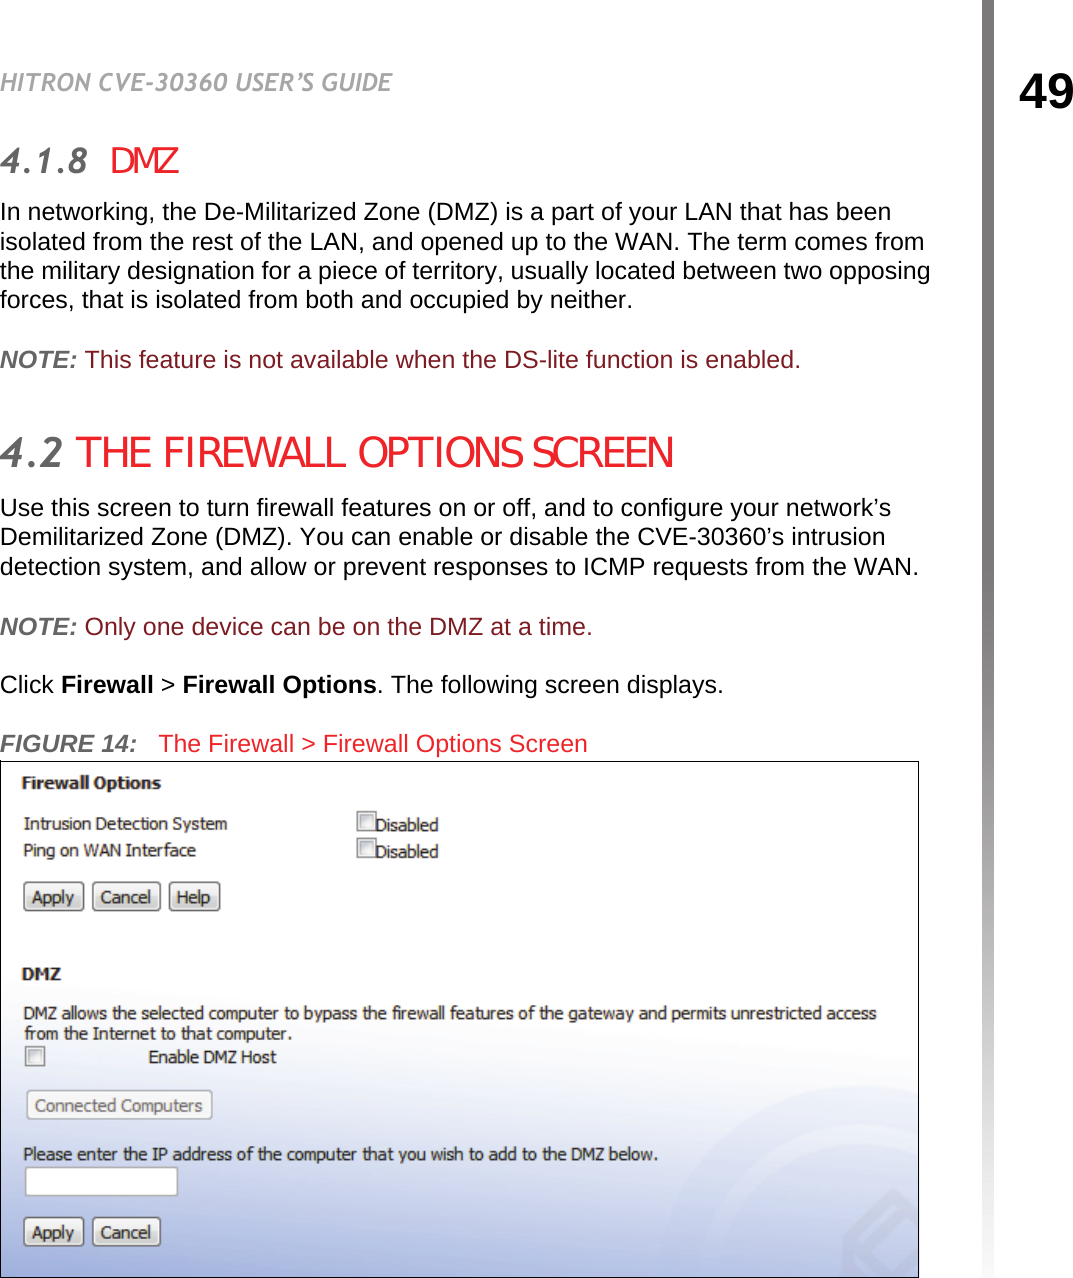 49HITRON CVE-30360 USER’S GUIDEFIREWALL4.1.8  DMZIn networking, the De-Militarized Zone (DMZ) is a part of your LAN that has been isolated from the rest of the LAN, and opened up to the WAN. The term comes from the military designation for a piece of territory, usually located between two opposing forces, that is isolated from both and occupied by neither.NOTE: This feature is not available when the DS-lite function is enabled.4.2 THE FIREWALL OPTIONS SCREENUse this screen to turn firewall features on or off, and to configure your network’s Demilitarized Zone (DMZ). You can enable or disable the CVE-30360’s intrusion detection system, and allow or prevent responses to ICMP requests from the WAN.NOTE: Only one device can be on the DMZ at a time.Click Firewall &gt; Firewall Options. The following screen displays.FIGURE 14:   The Firewall &gt; Firewall Options Screen